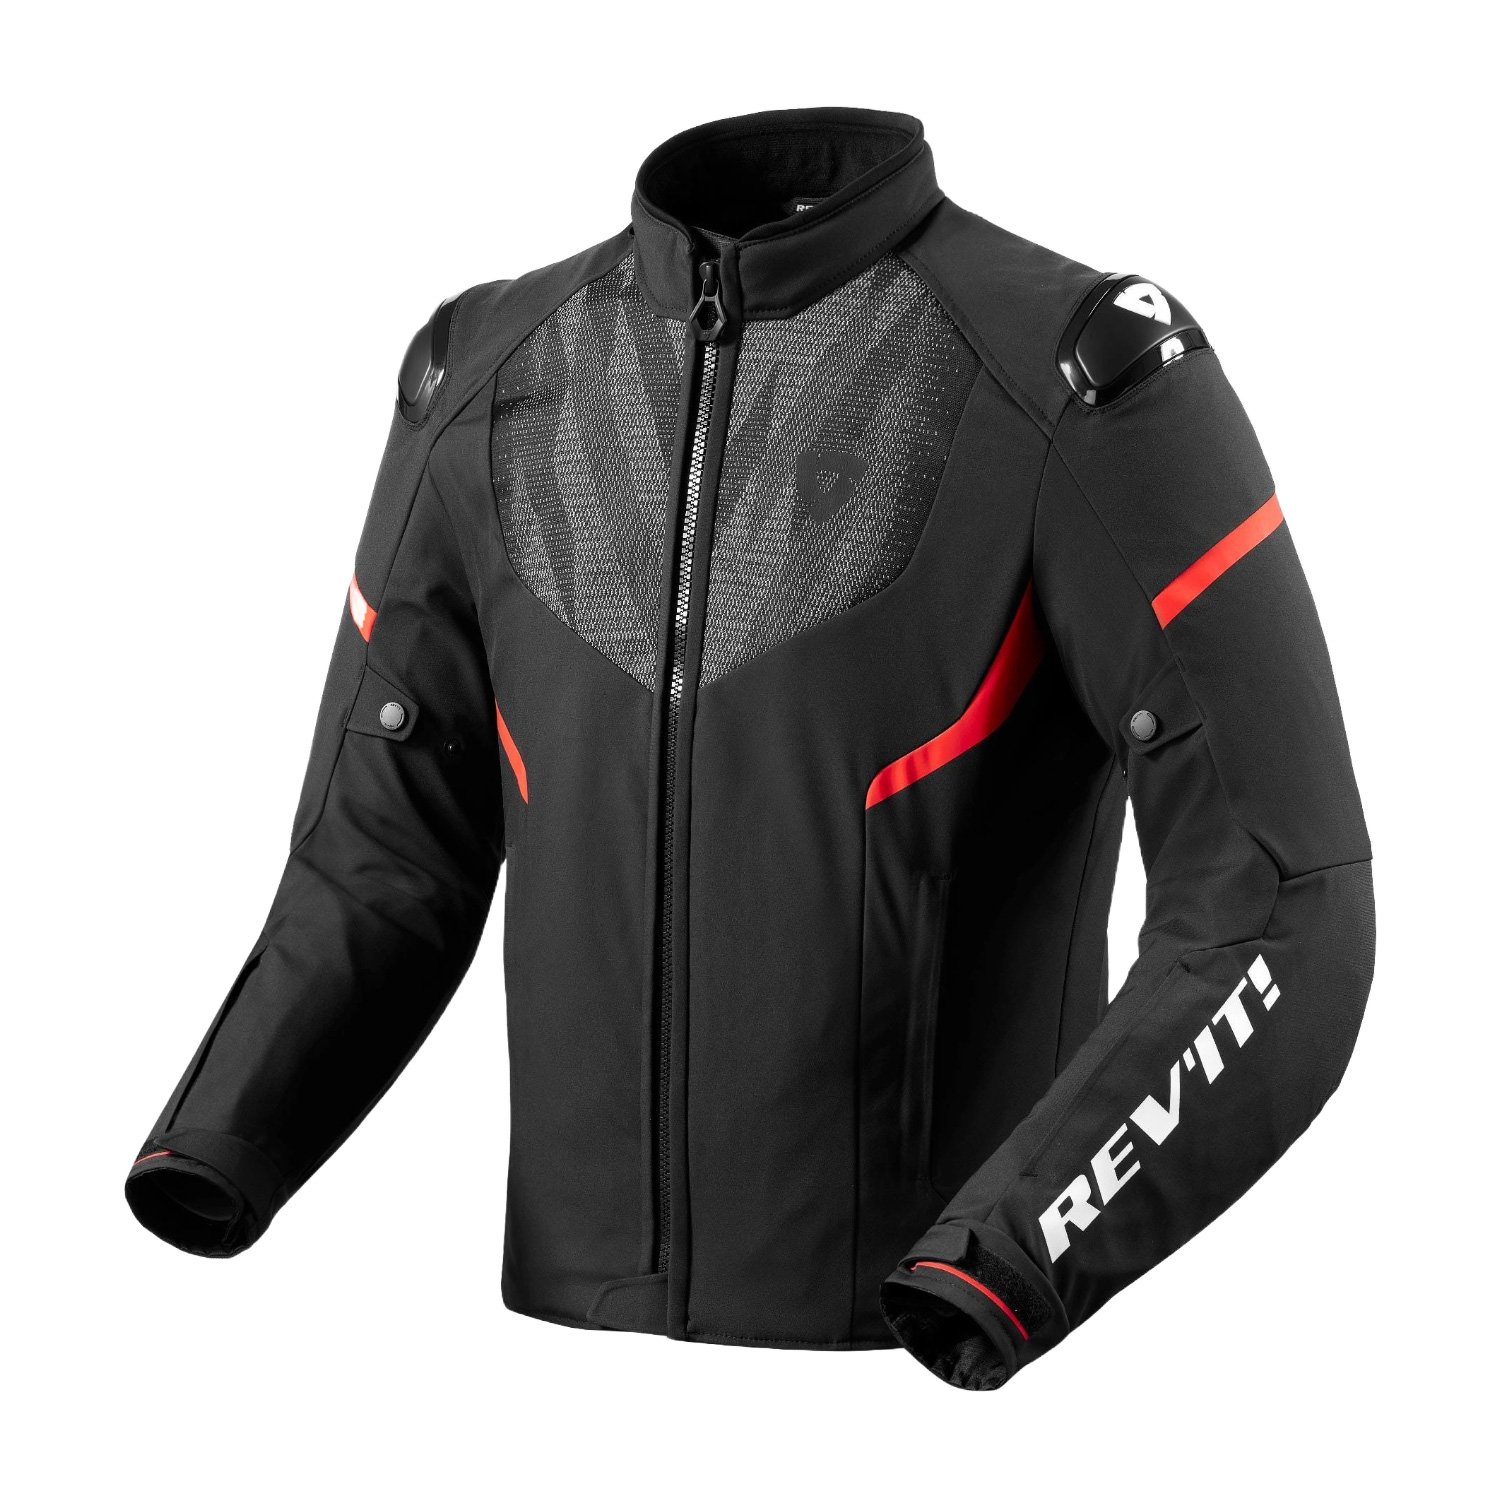 Image of REV'IT! Hyperspeed 2 H2O Jacket Black Neon Red Talla S